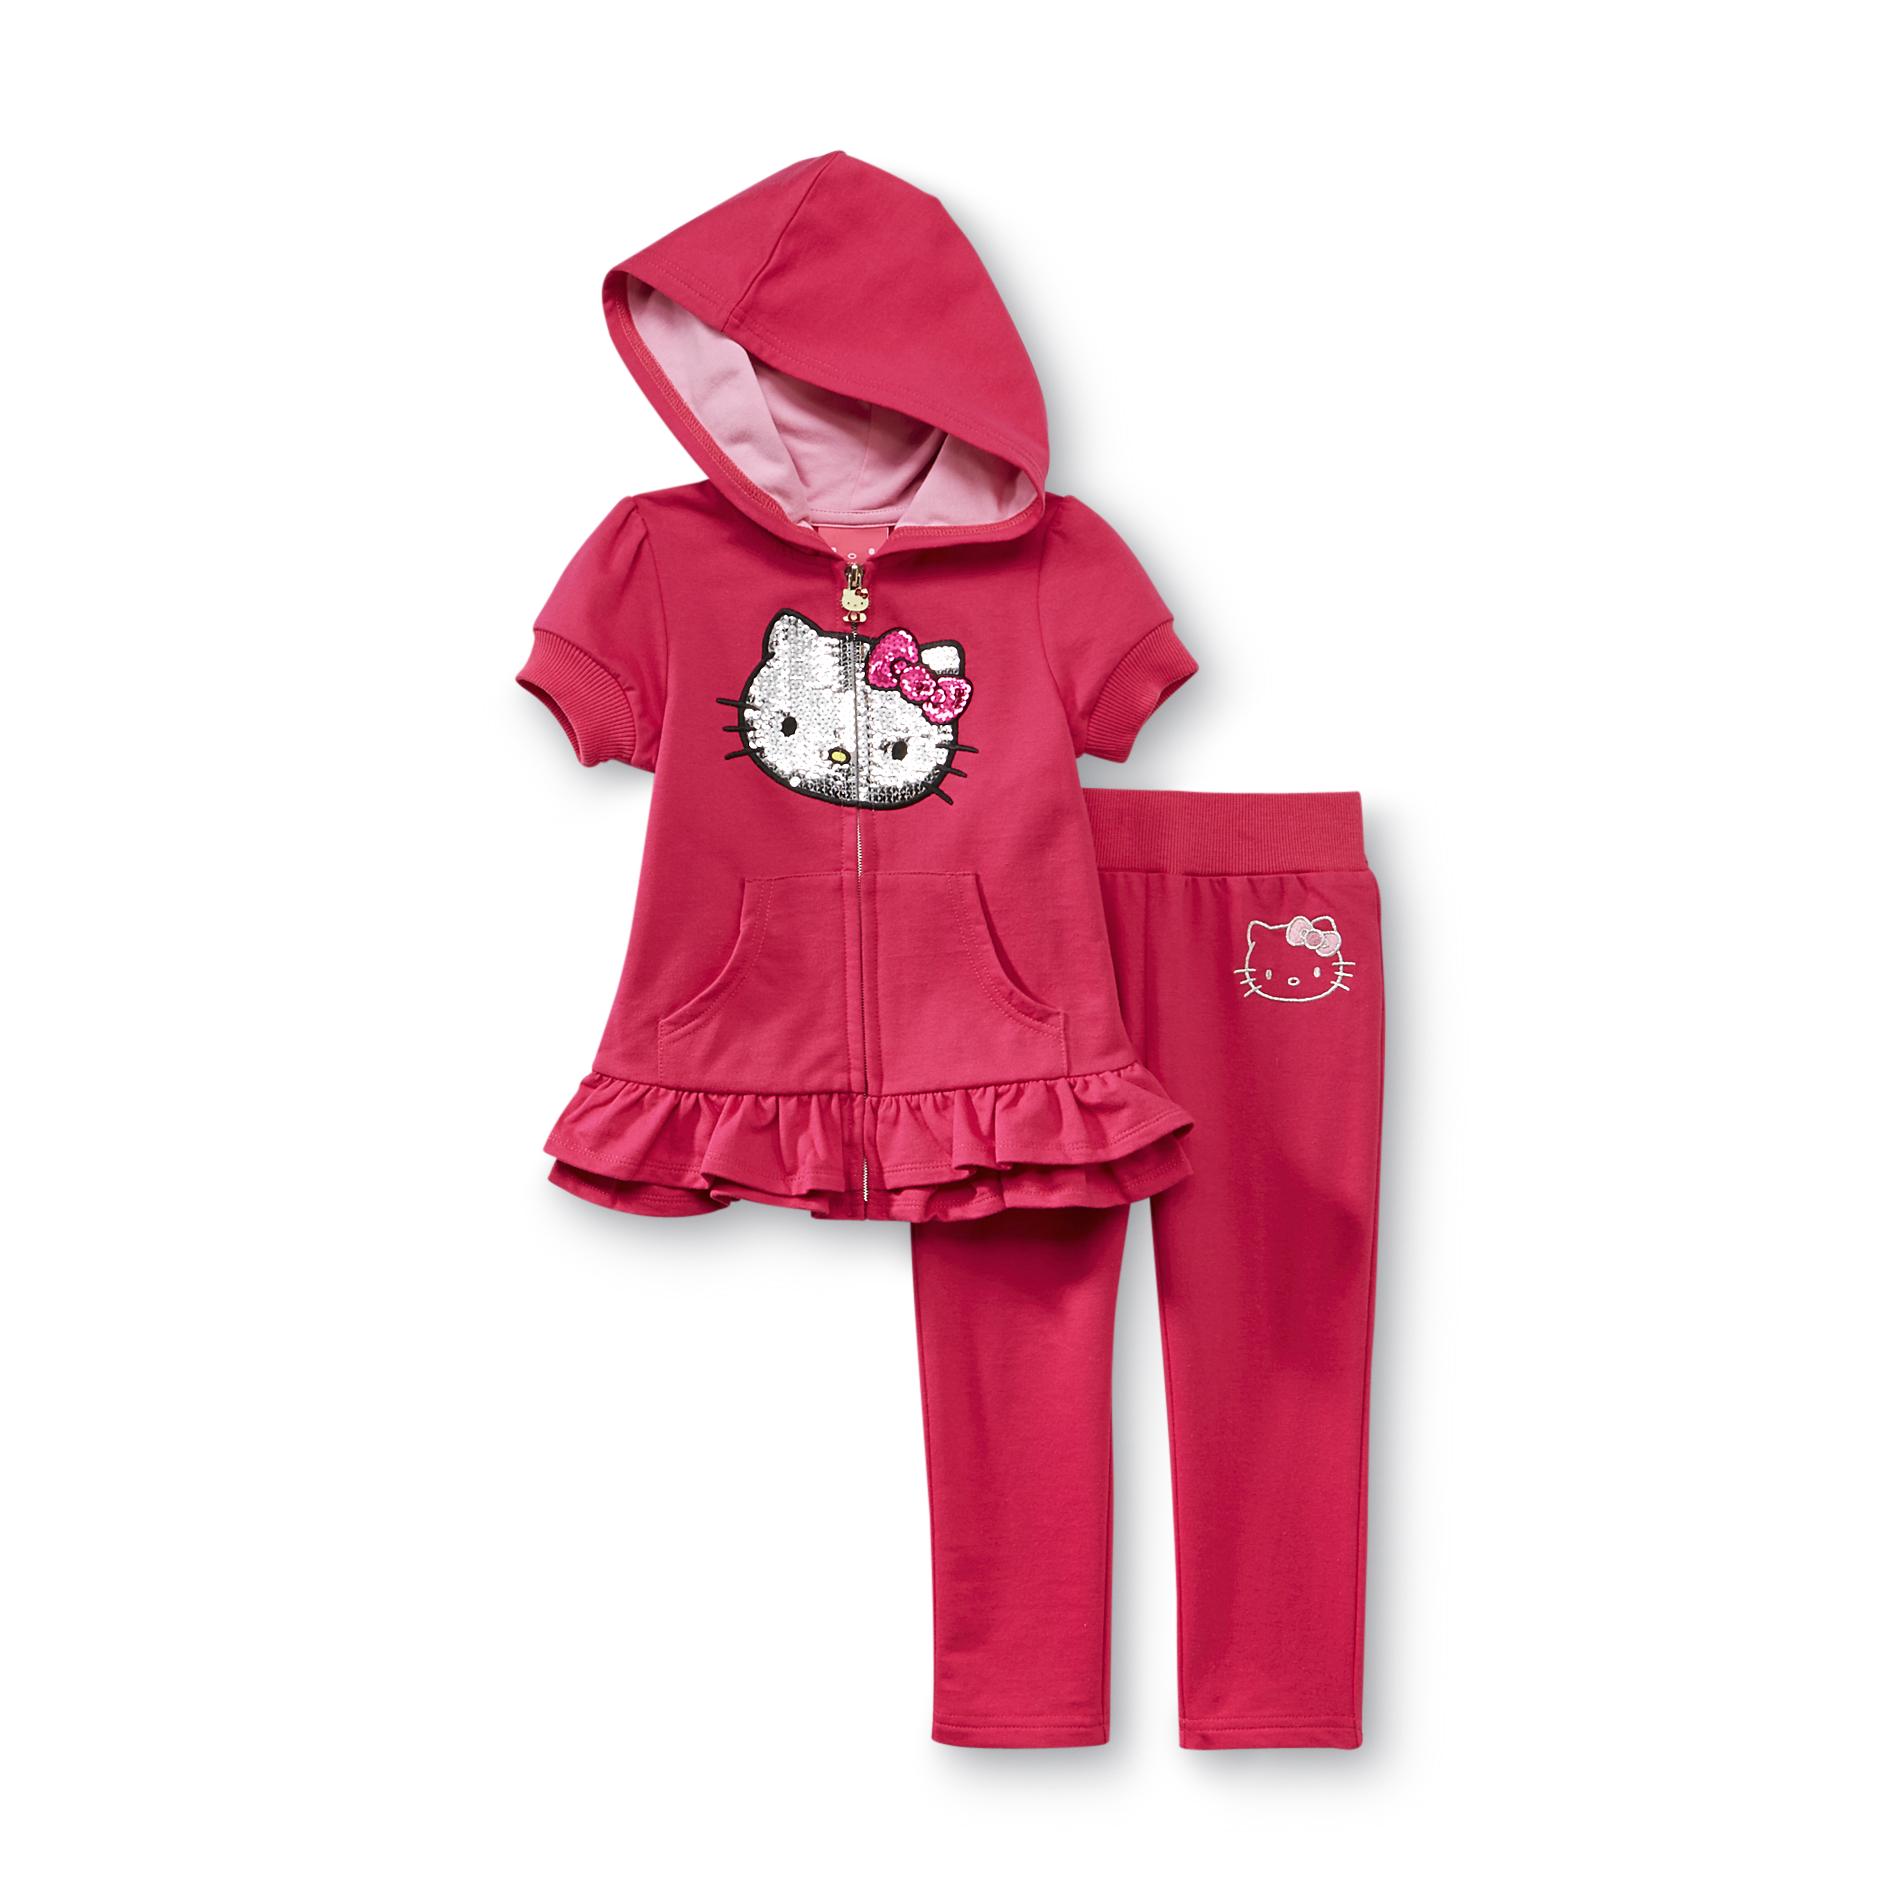 Hello Kitty Toddler Girl's Jacket & Pants - Sequined